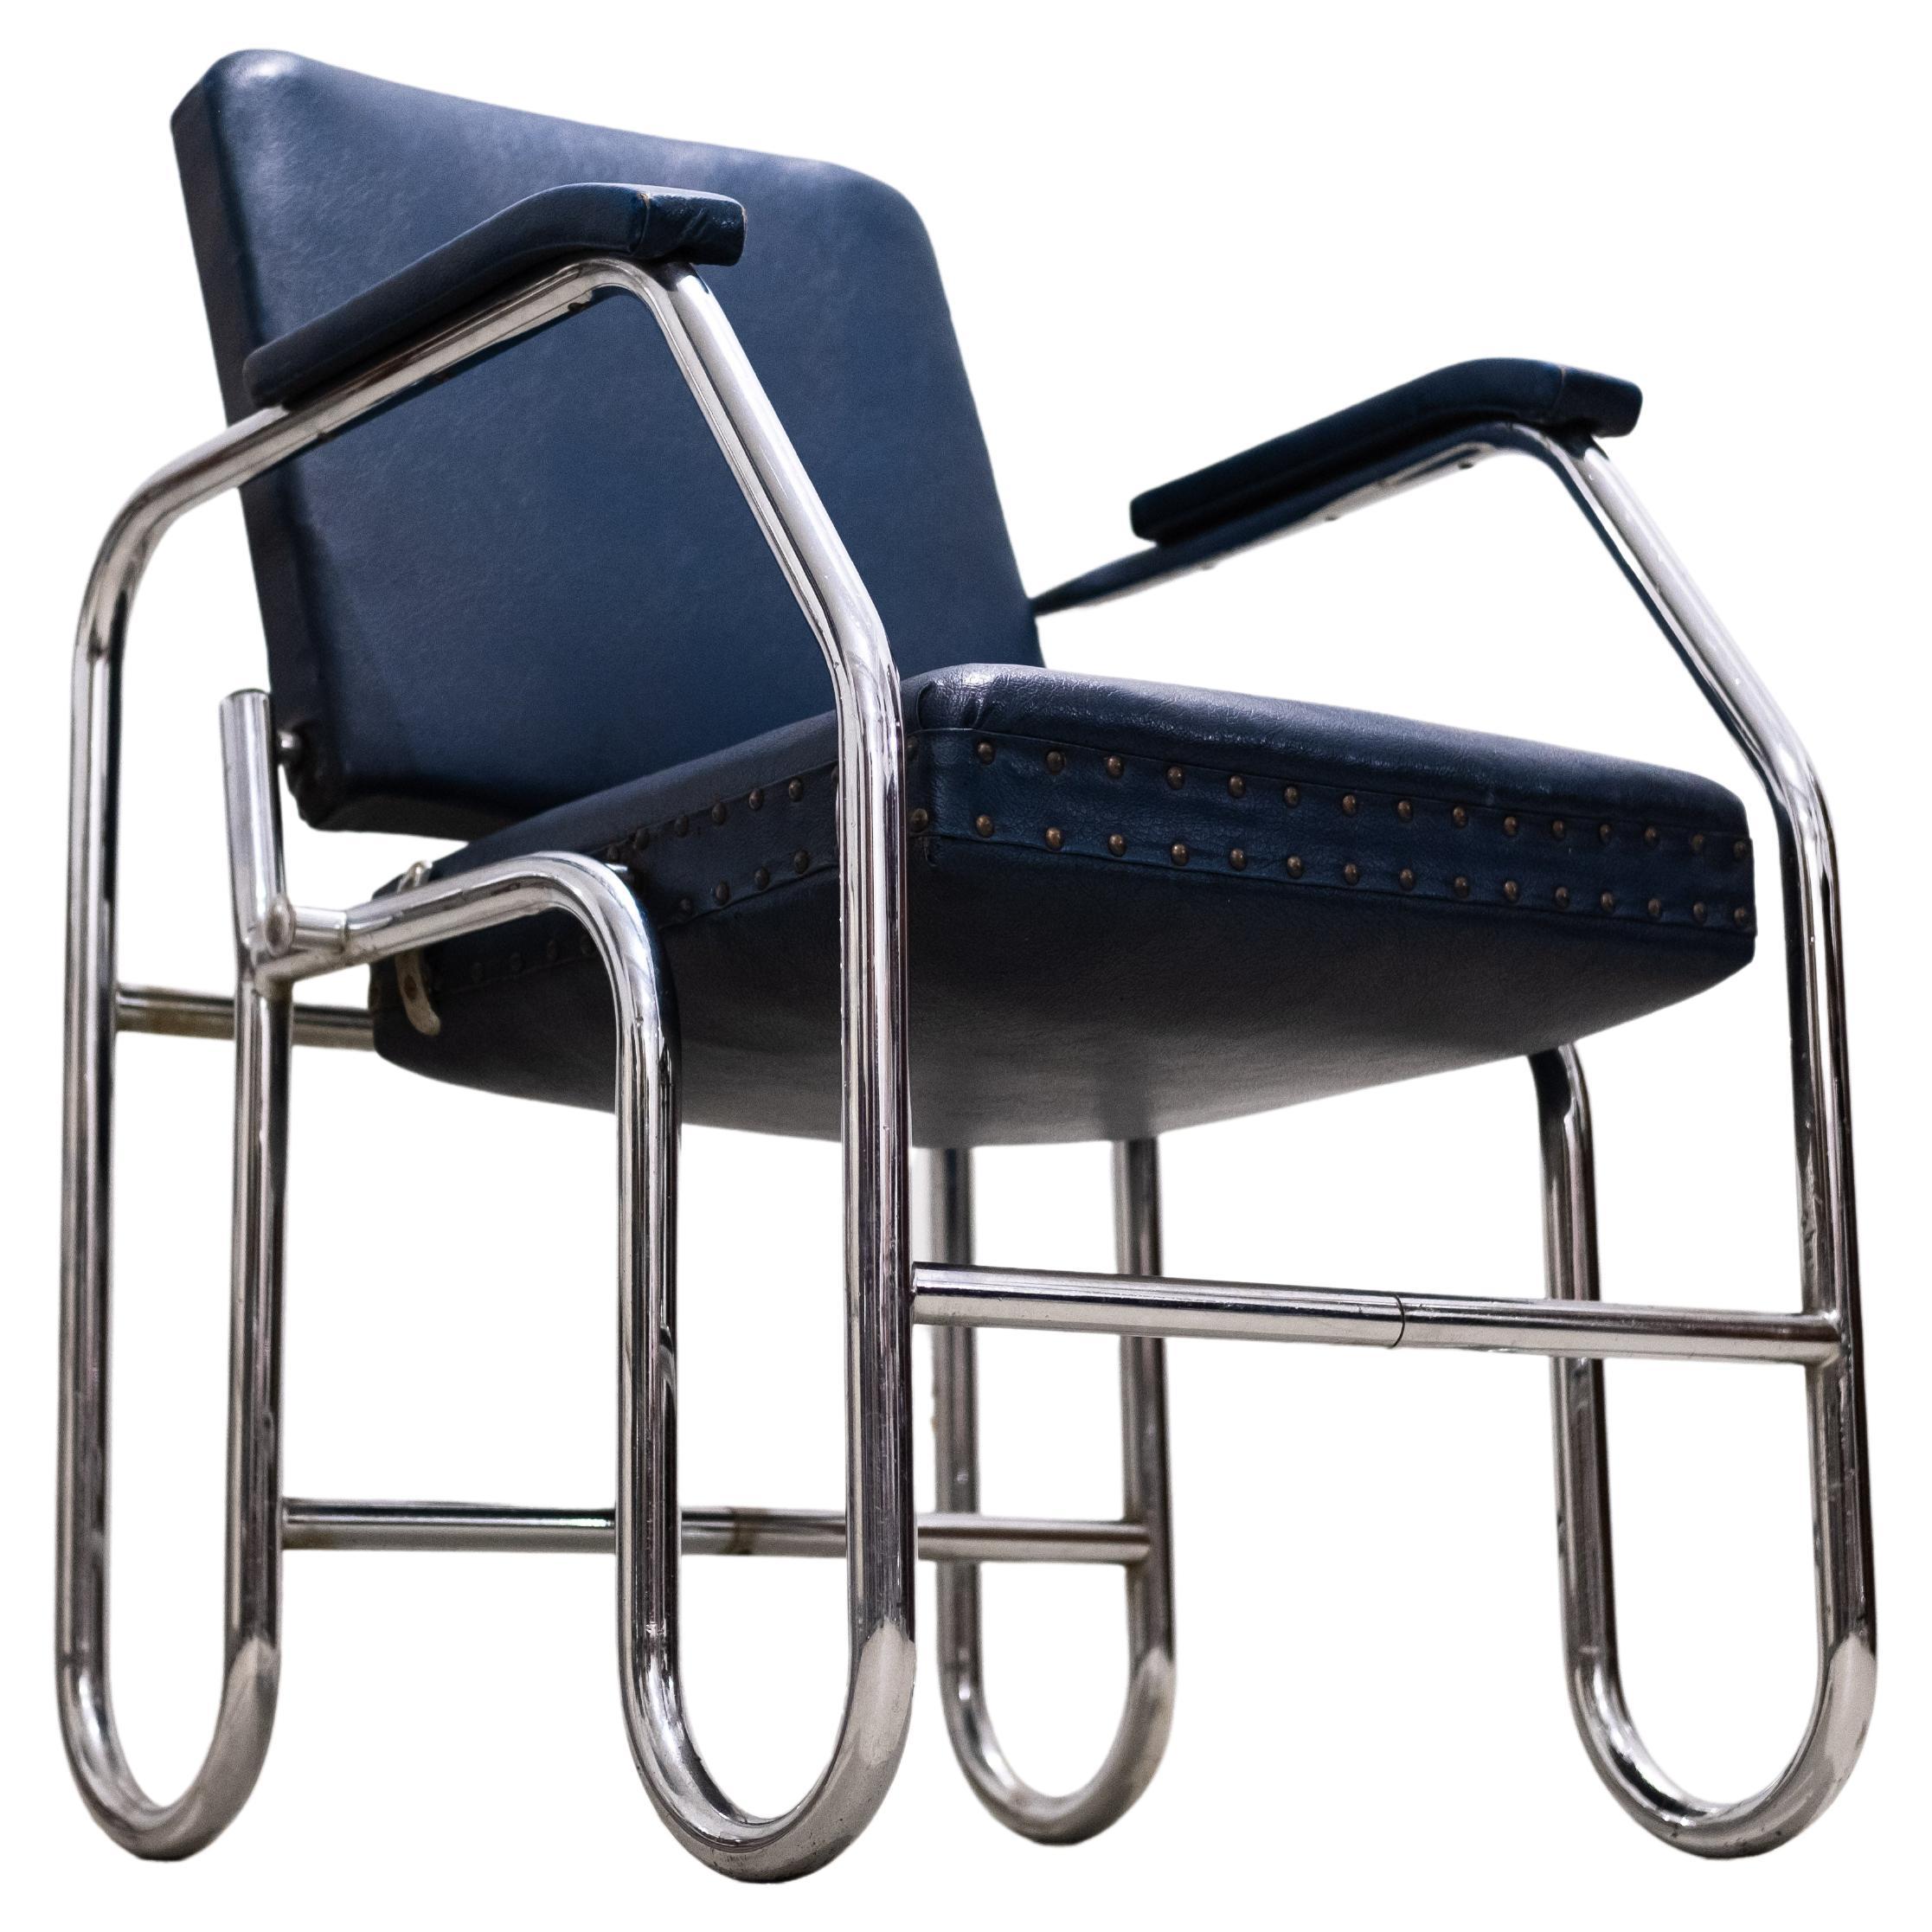 Blue Bauhaus Steelpipe Armchair with rotatable Seat (Amsterdam, 1930) For Sale